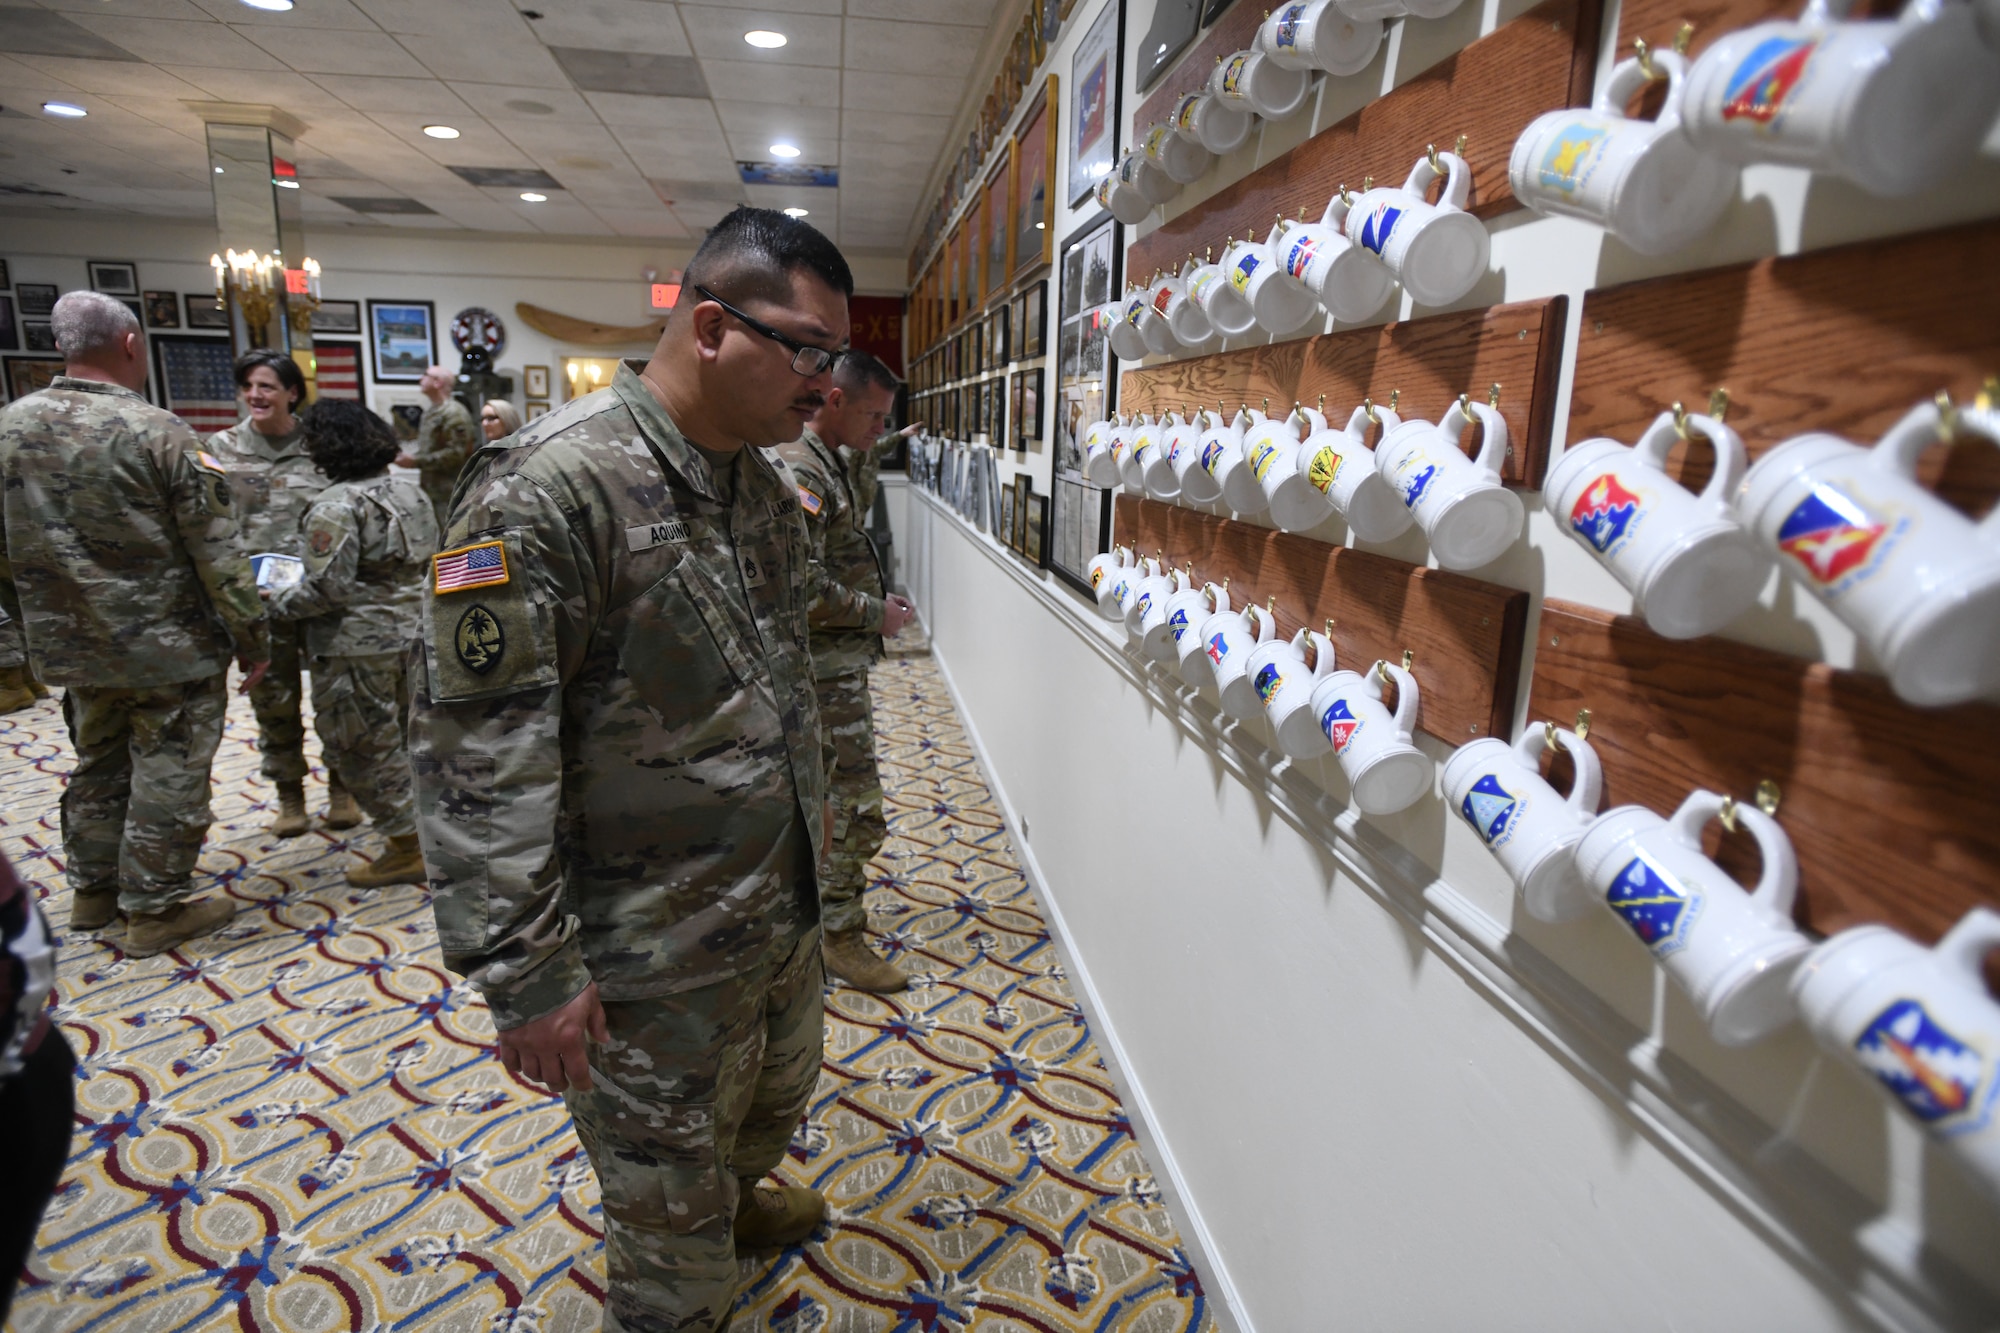 Guam Army National Guard Staff Sgt. Joseph B. Aquino looks at rows of beer steins with emblems from 90 Air National Guard wings during the opening ceremony at The 1636 Room at Joint Base Myer-Henderson Hall’s Patton Hall in Arlington, Virginia, Nov. 1, 2023. Army Gen. Daniel Hokanson, chief of the National Guard Bureau, said the intent of The 1636 Room is to offer a heritage exhibit where Guard members can gather for events and social occasions and for others to learn more about the force.